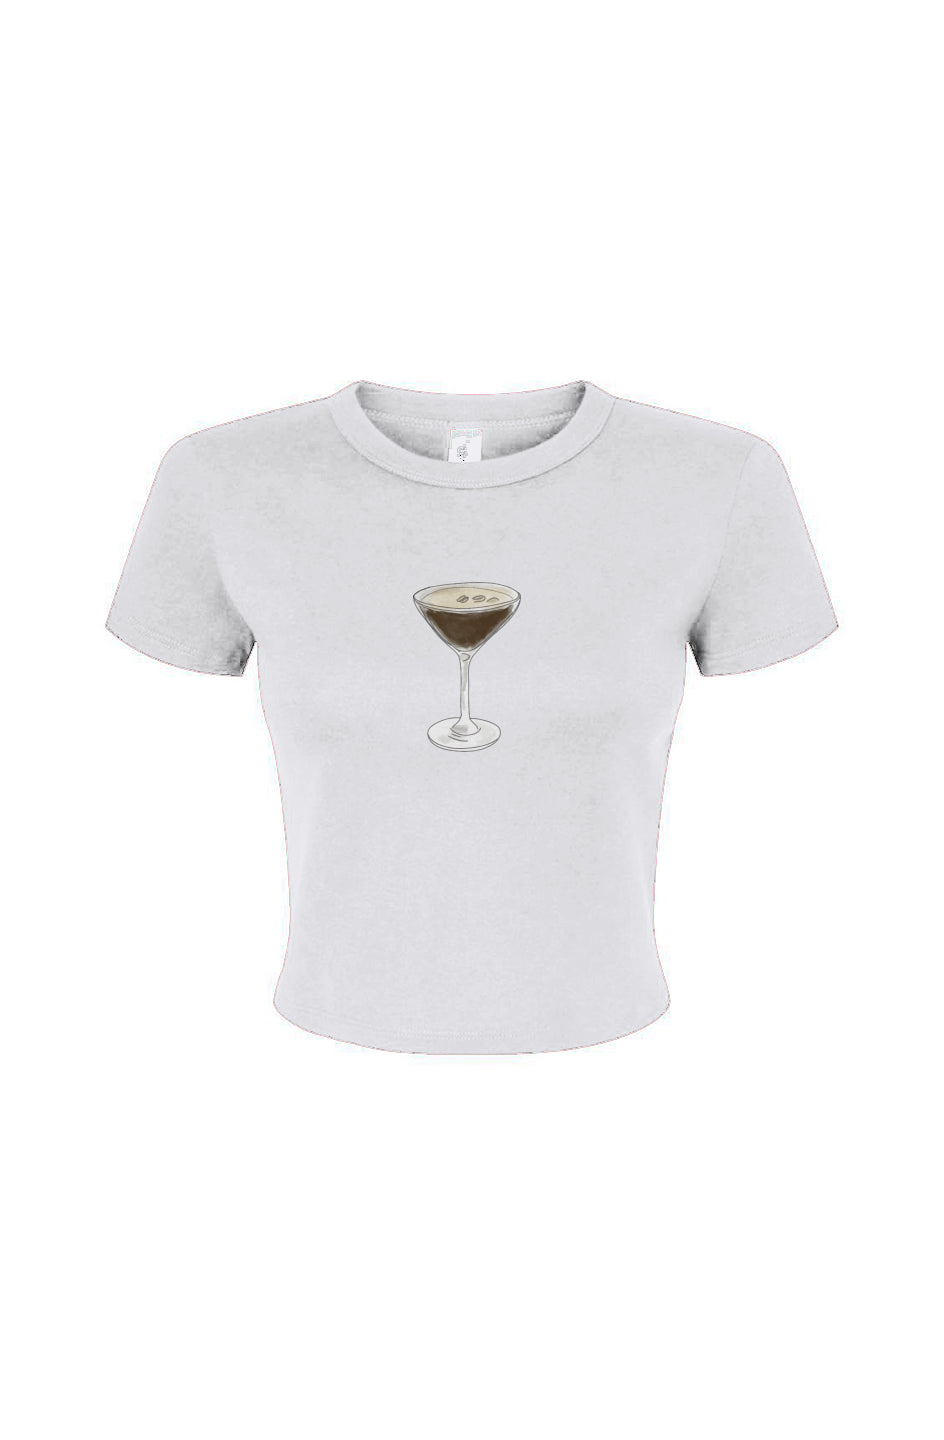 Espresso Martini Fitted Baby Tee